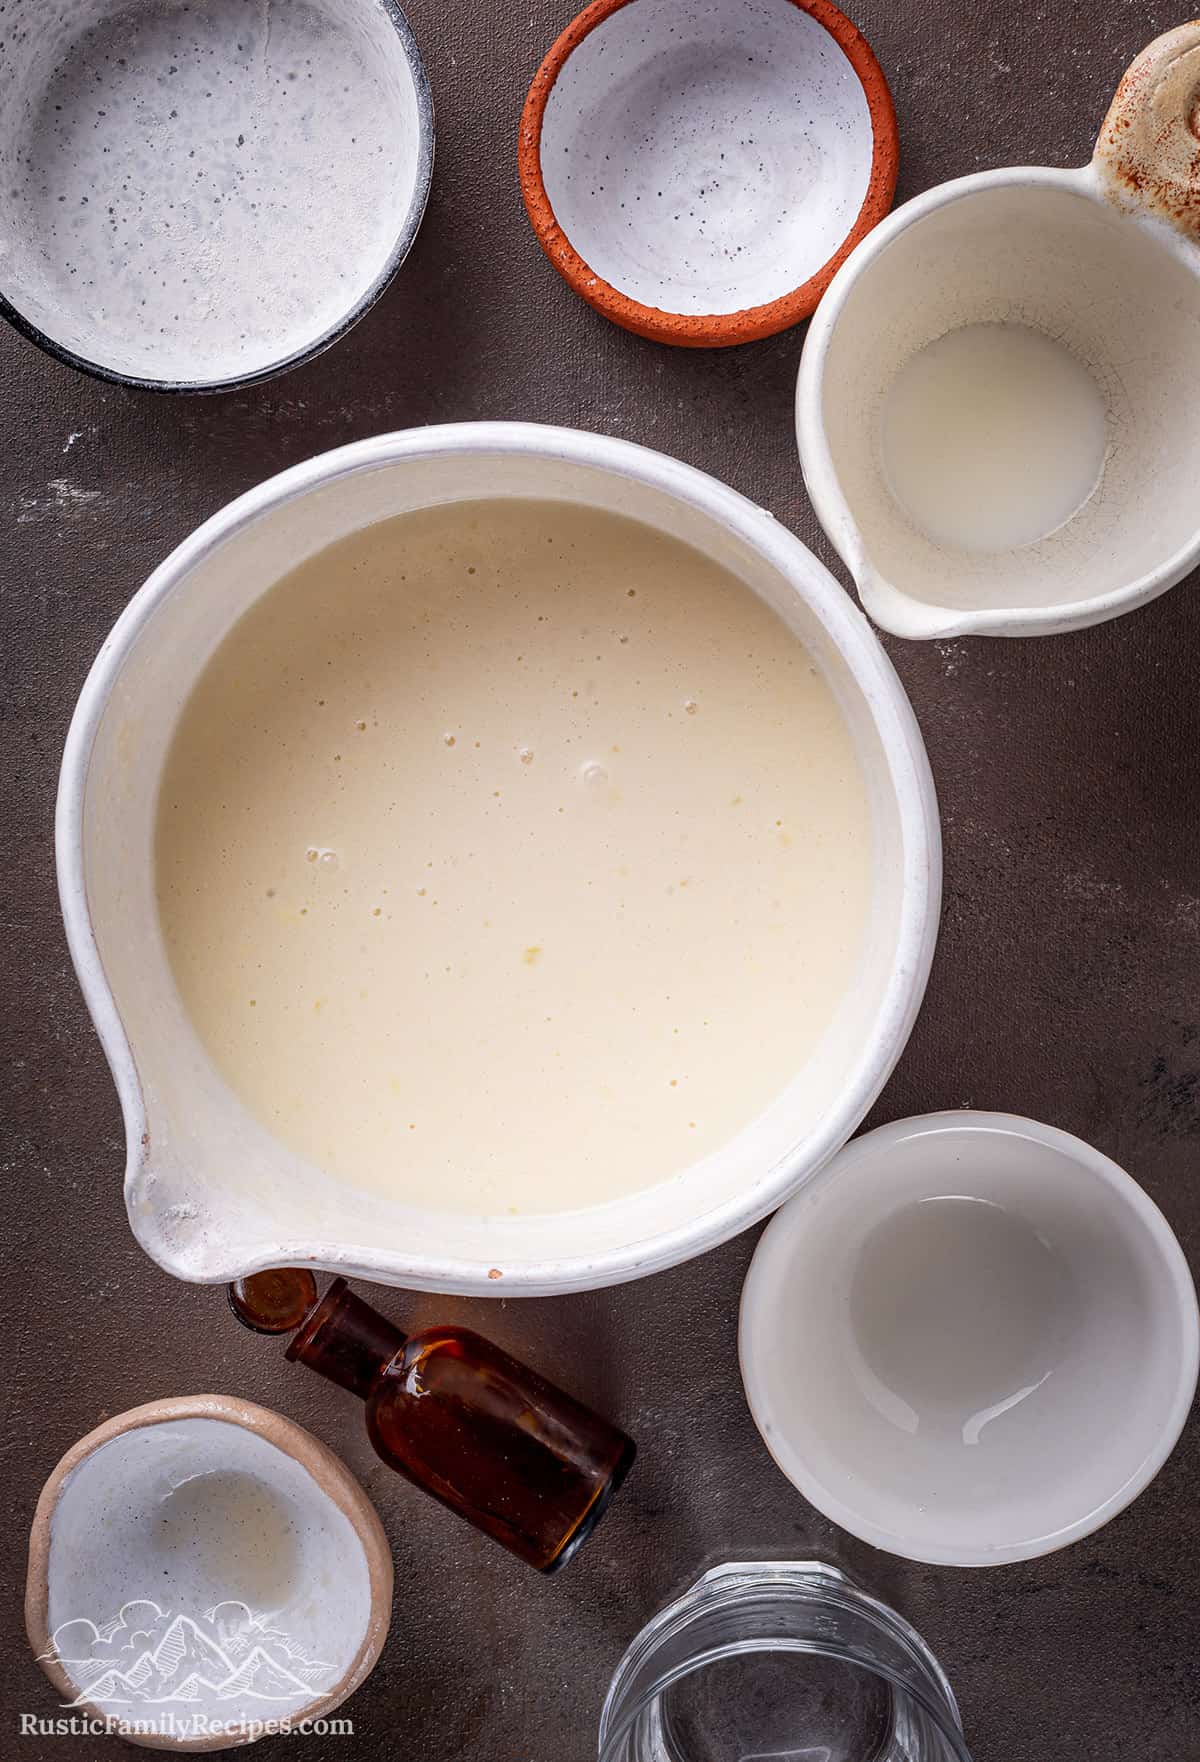 Crepe batter for Frumple Cakes in a white bowl next to empty bowls